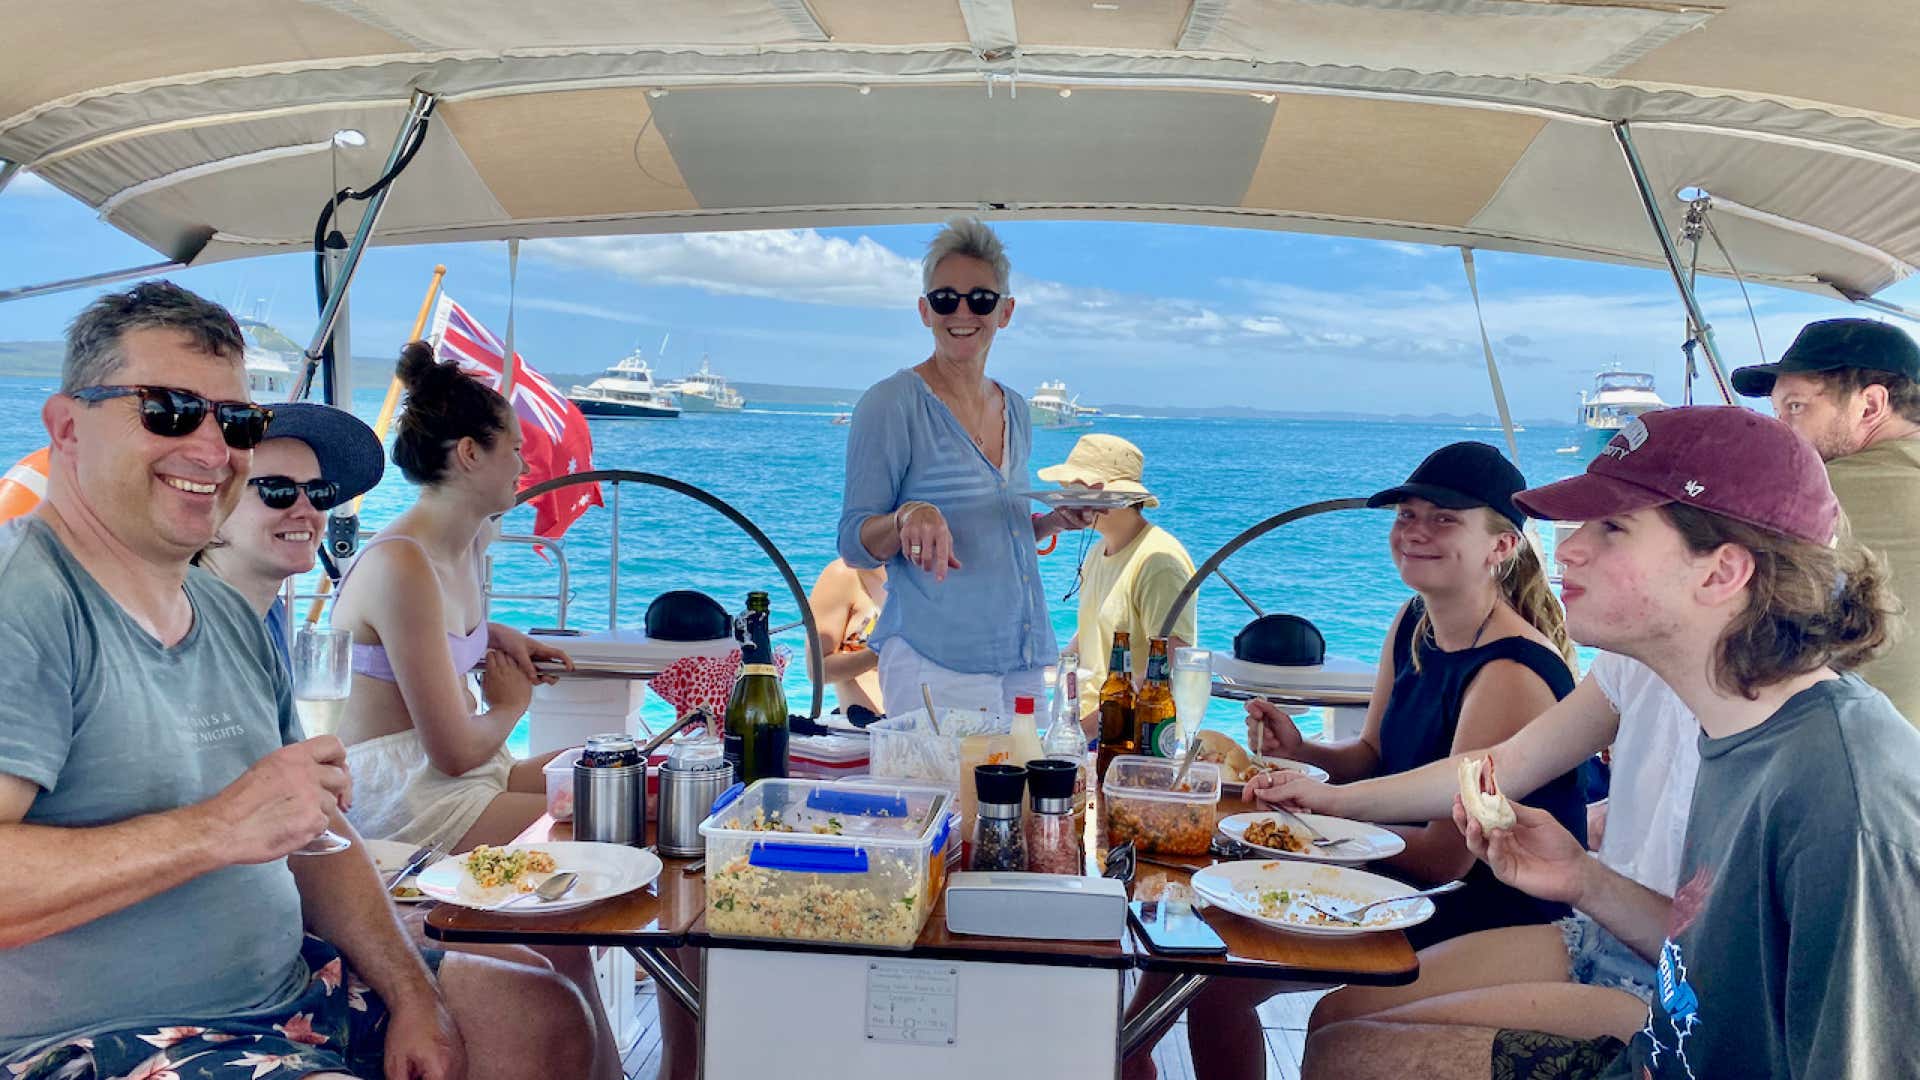 Guests dining aboard sailing yacht Curlew Escape on a private yacht charter in Moreton Bay, Brisbane.